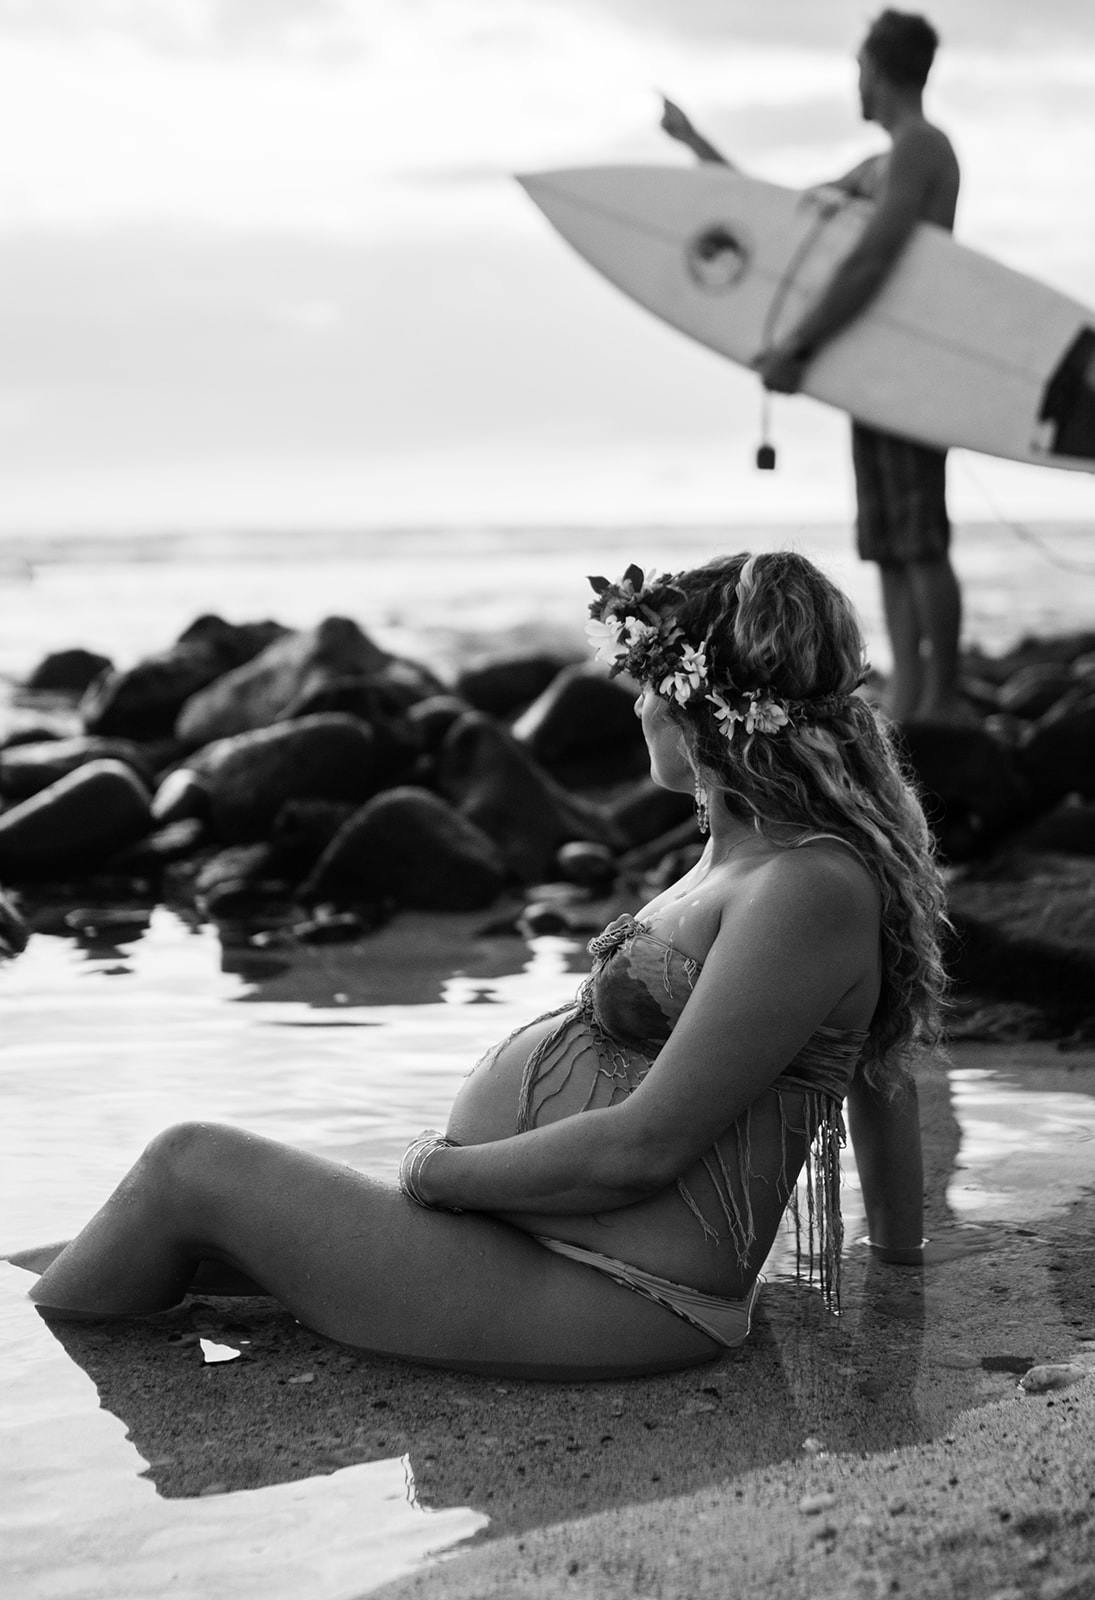 Maui maternity photography packages for capturing your pregnancy milestones